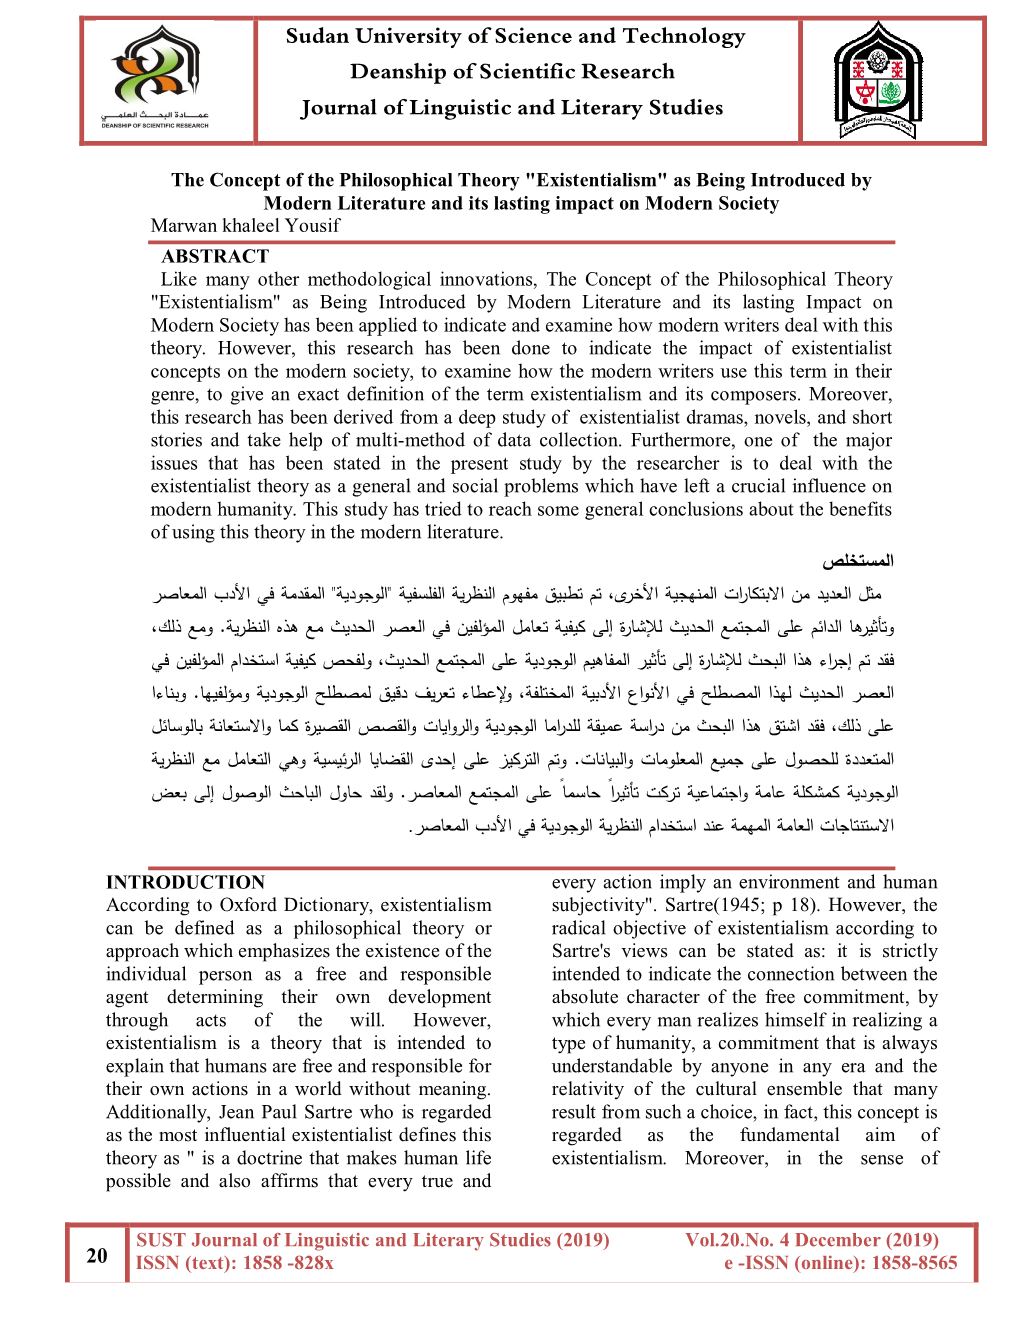 Sudan University of Science and Technology Deanship of Scientific Research Journal of Linguistic and Literary Studies